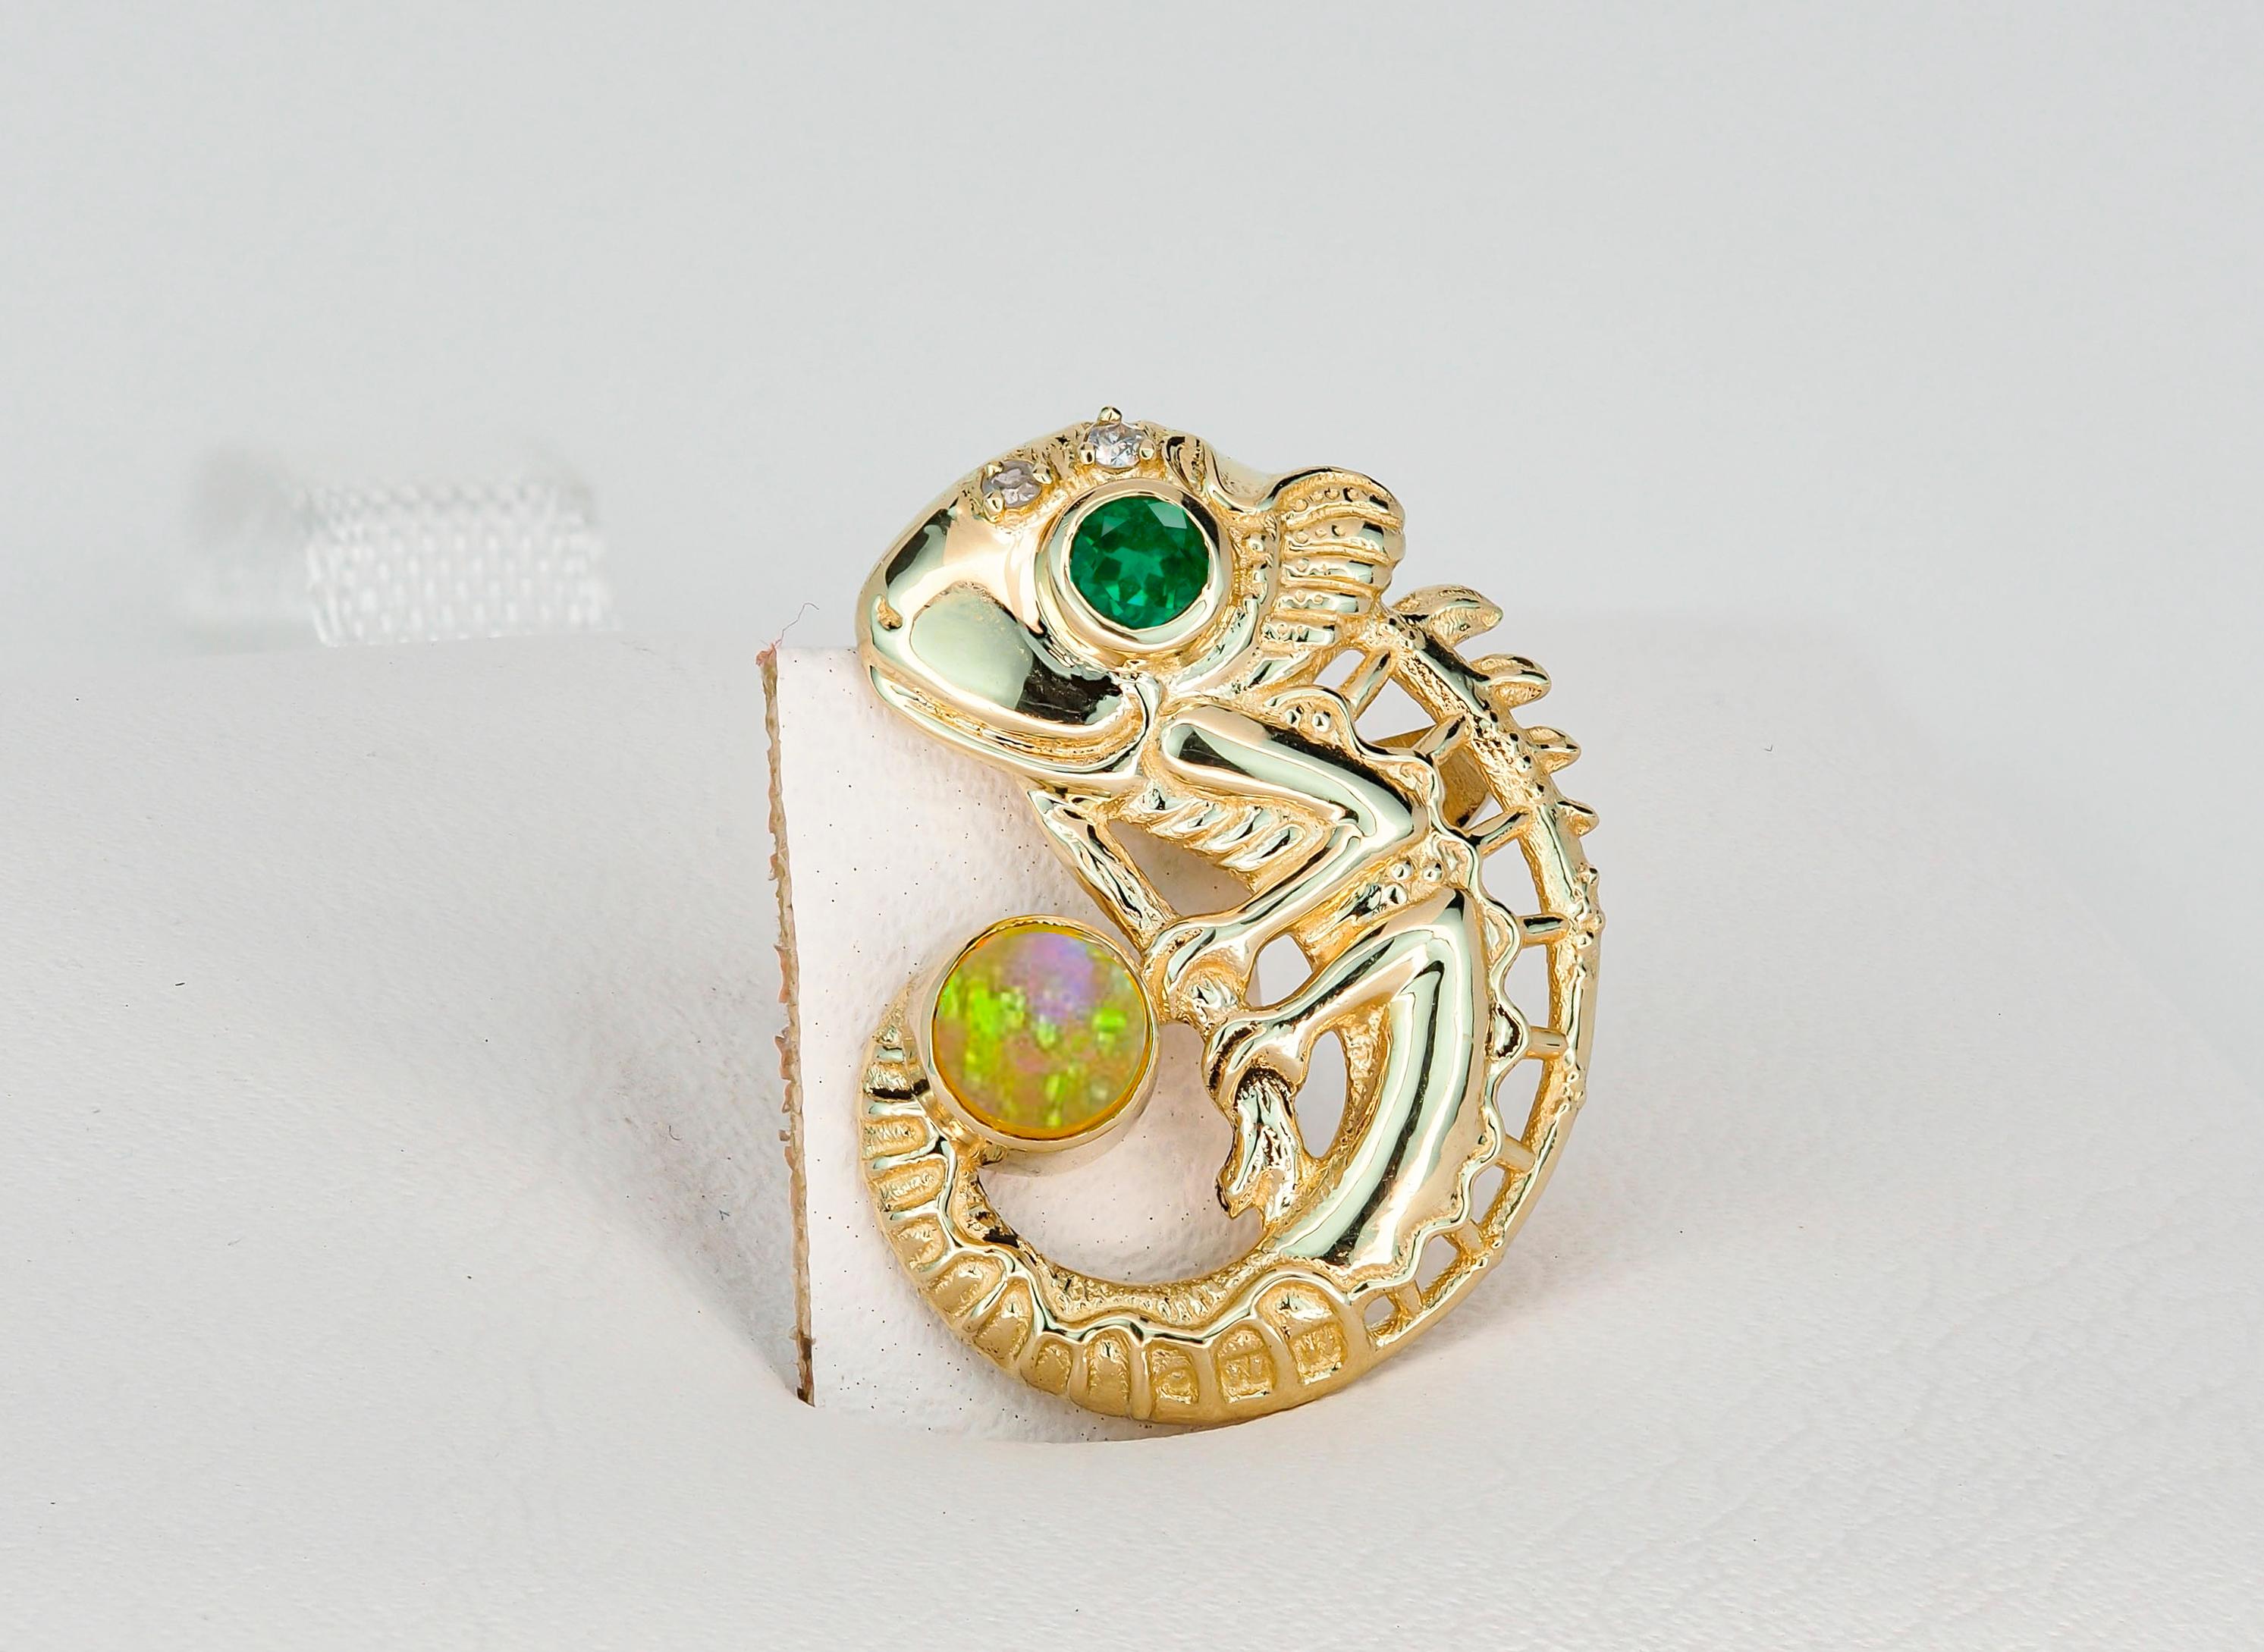 Women's 14k Gold Pendant with Opal, Emerald and Diamonds, Chameleon Pendant! For Sale